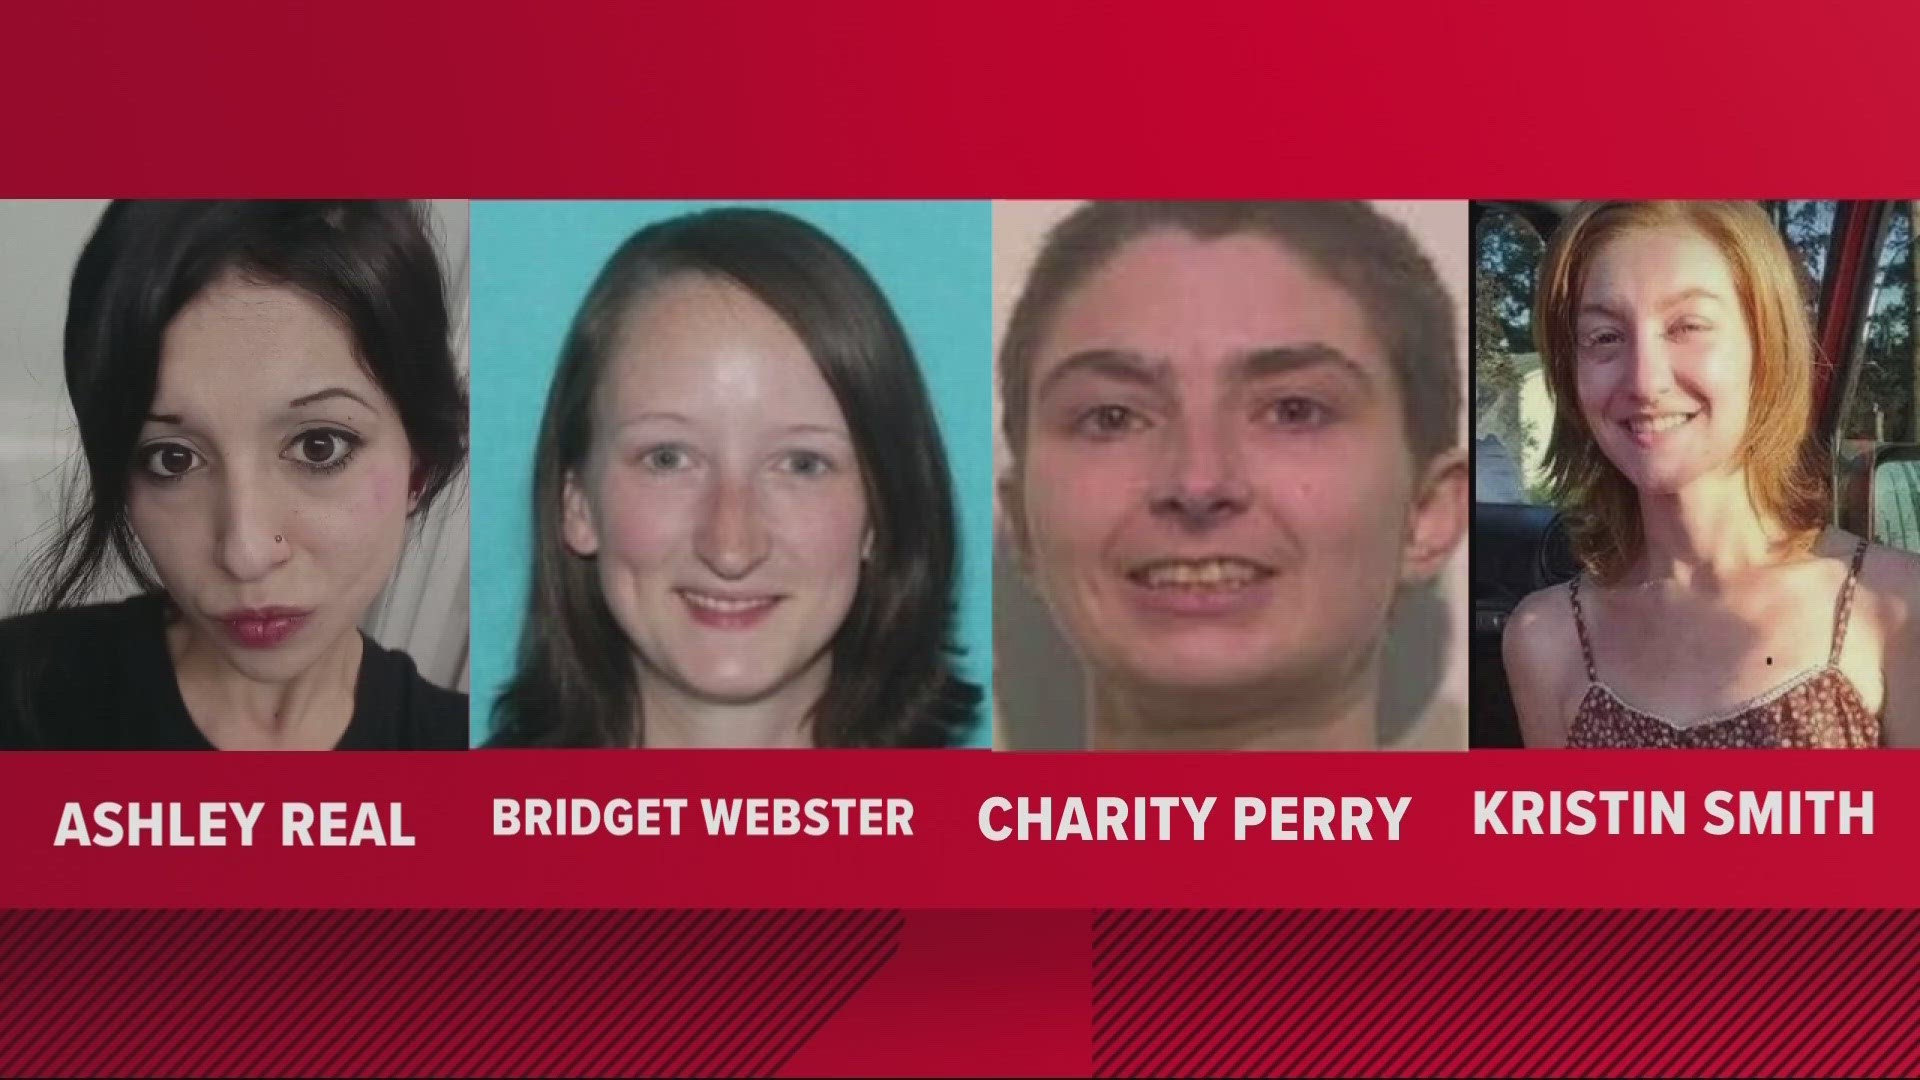 The four women were found dead in and around Portland over the past six months. Authorities say they have identified a person of interest.